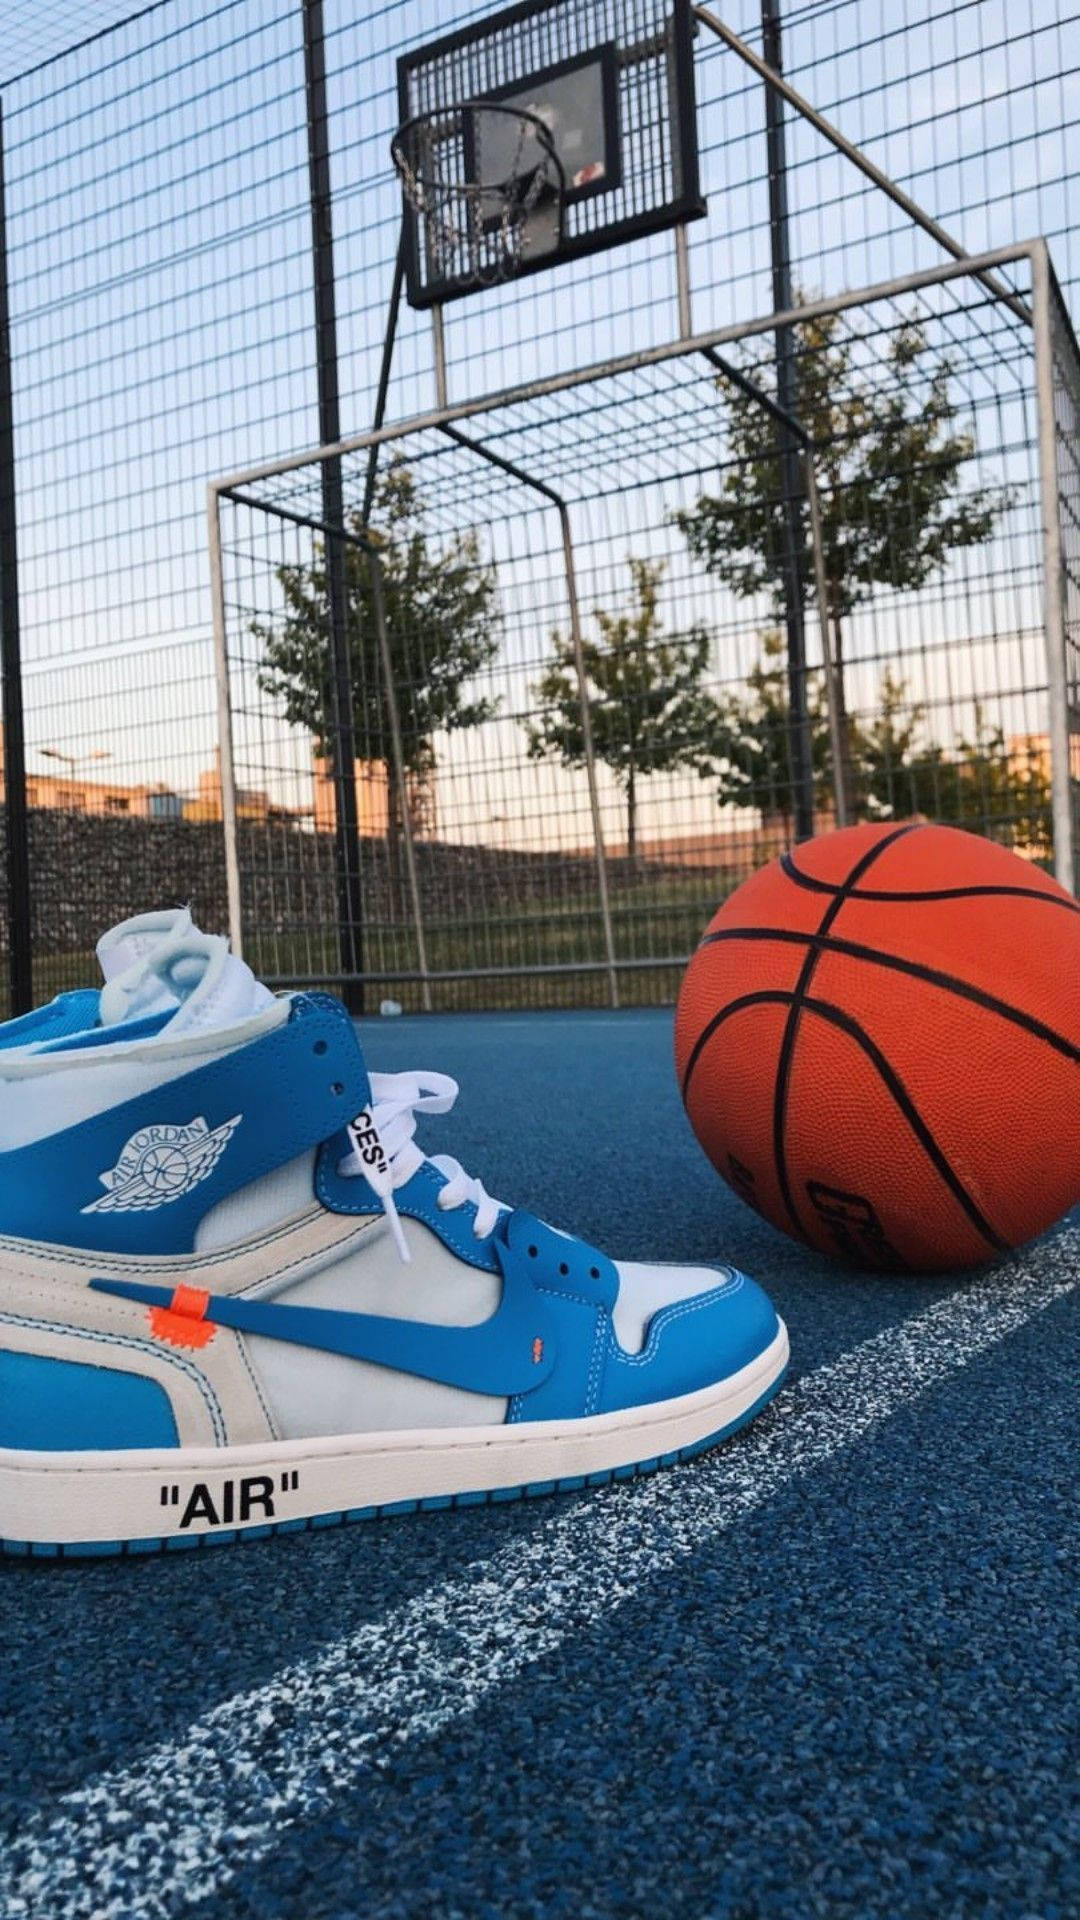 Basketball Iphone Blue Shoe And Ball